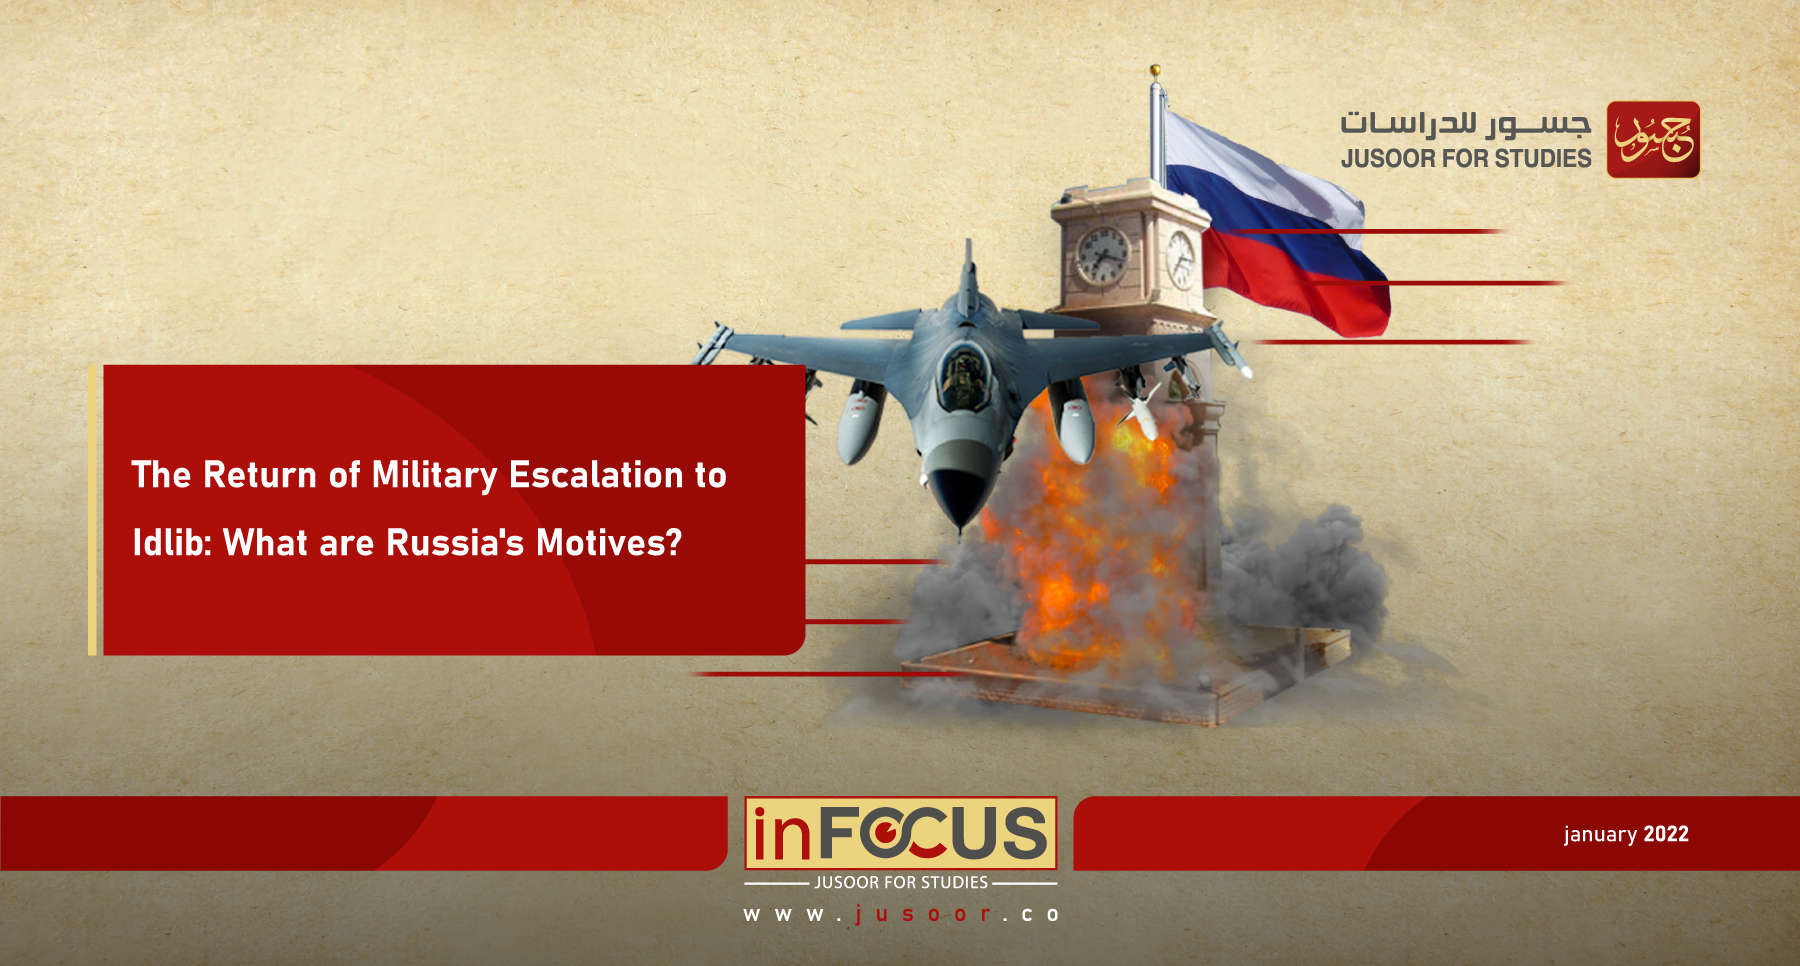 The Return of Military Escalation to Idlib: What are Russia's Motives?